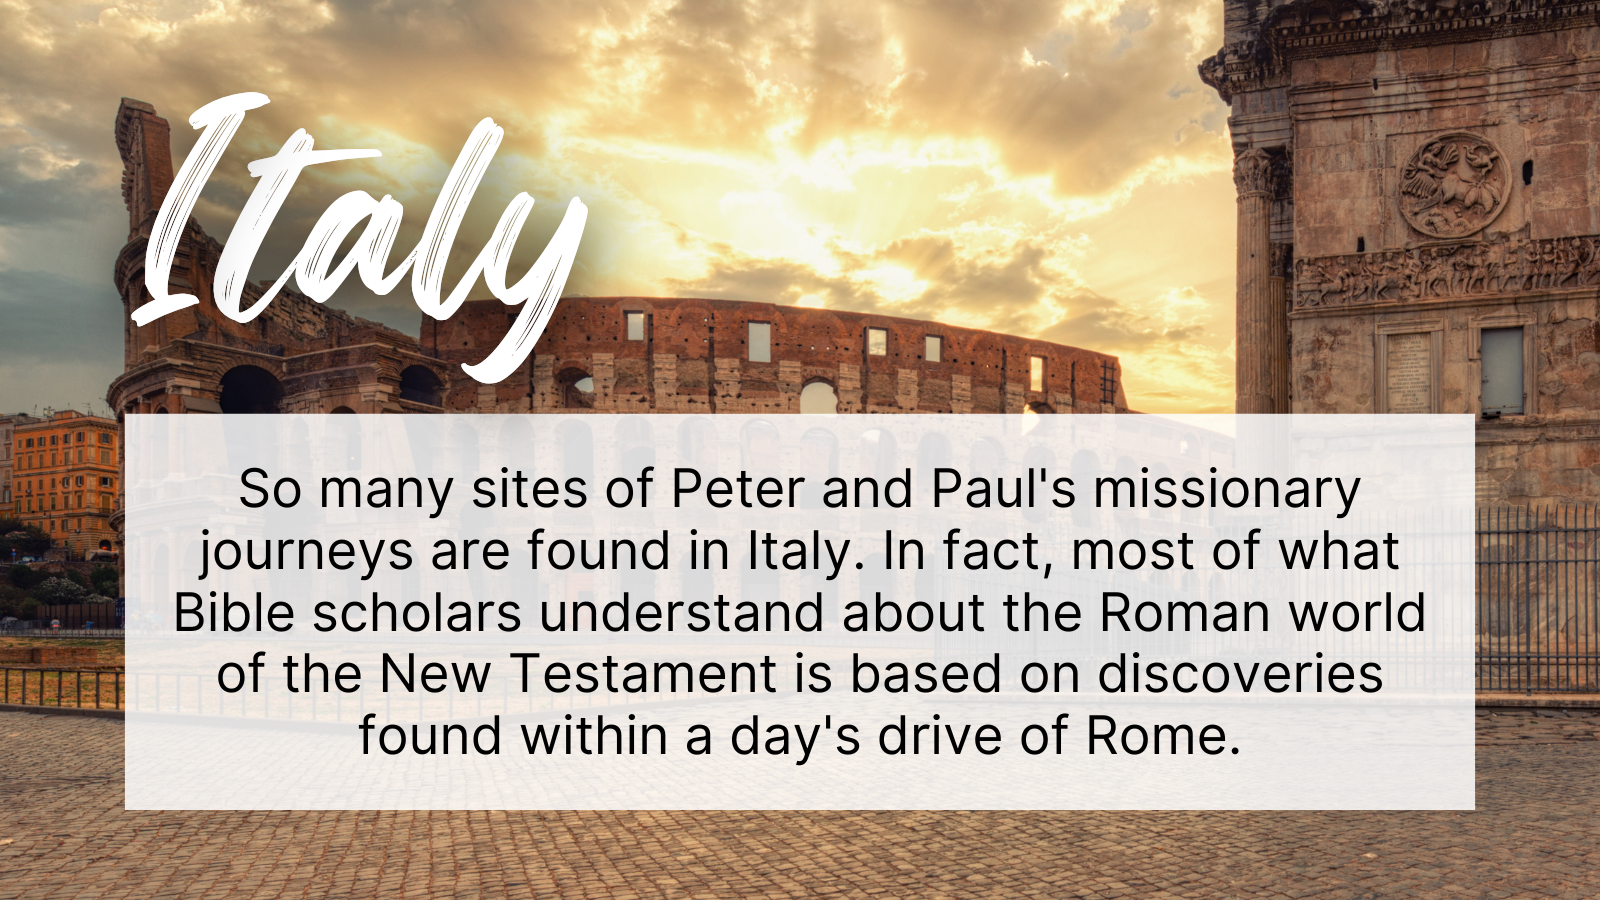 So many sites of Peter and Paul's missionary journeys are found in Italy. In fact, most of what Bible scholars understand about the Roman world of the New Testament is based on discoveries found within a day's drive of Rome.